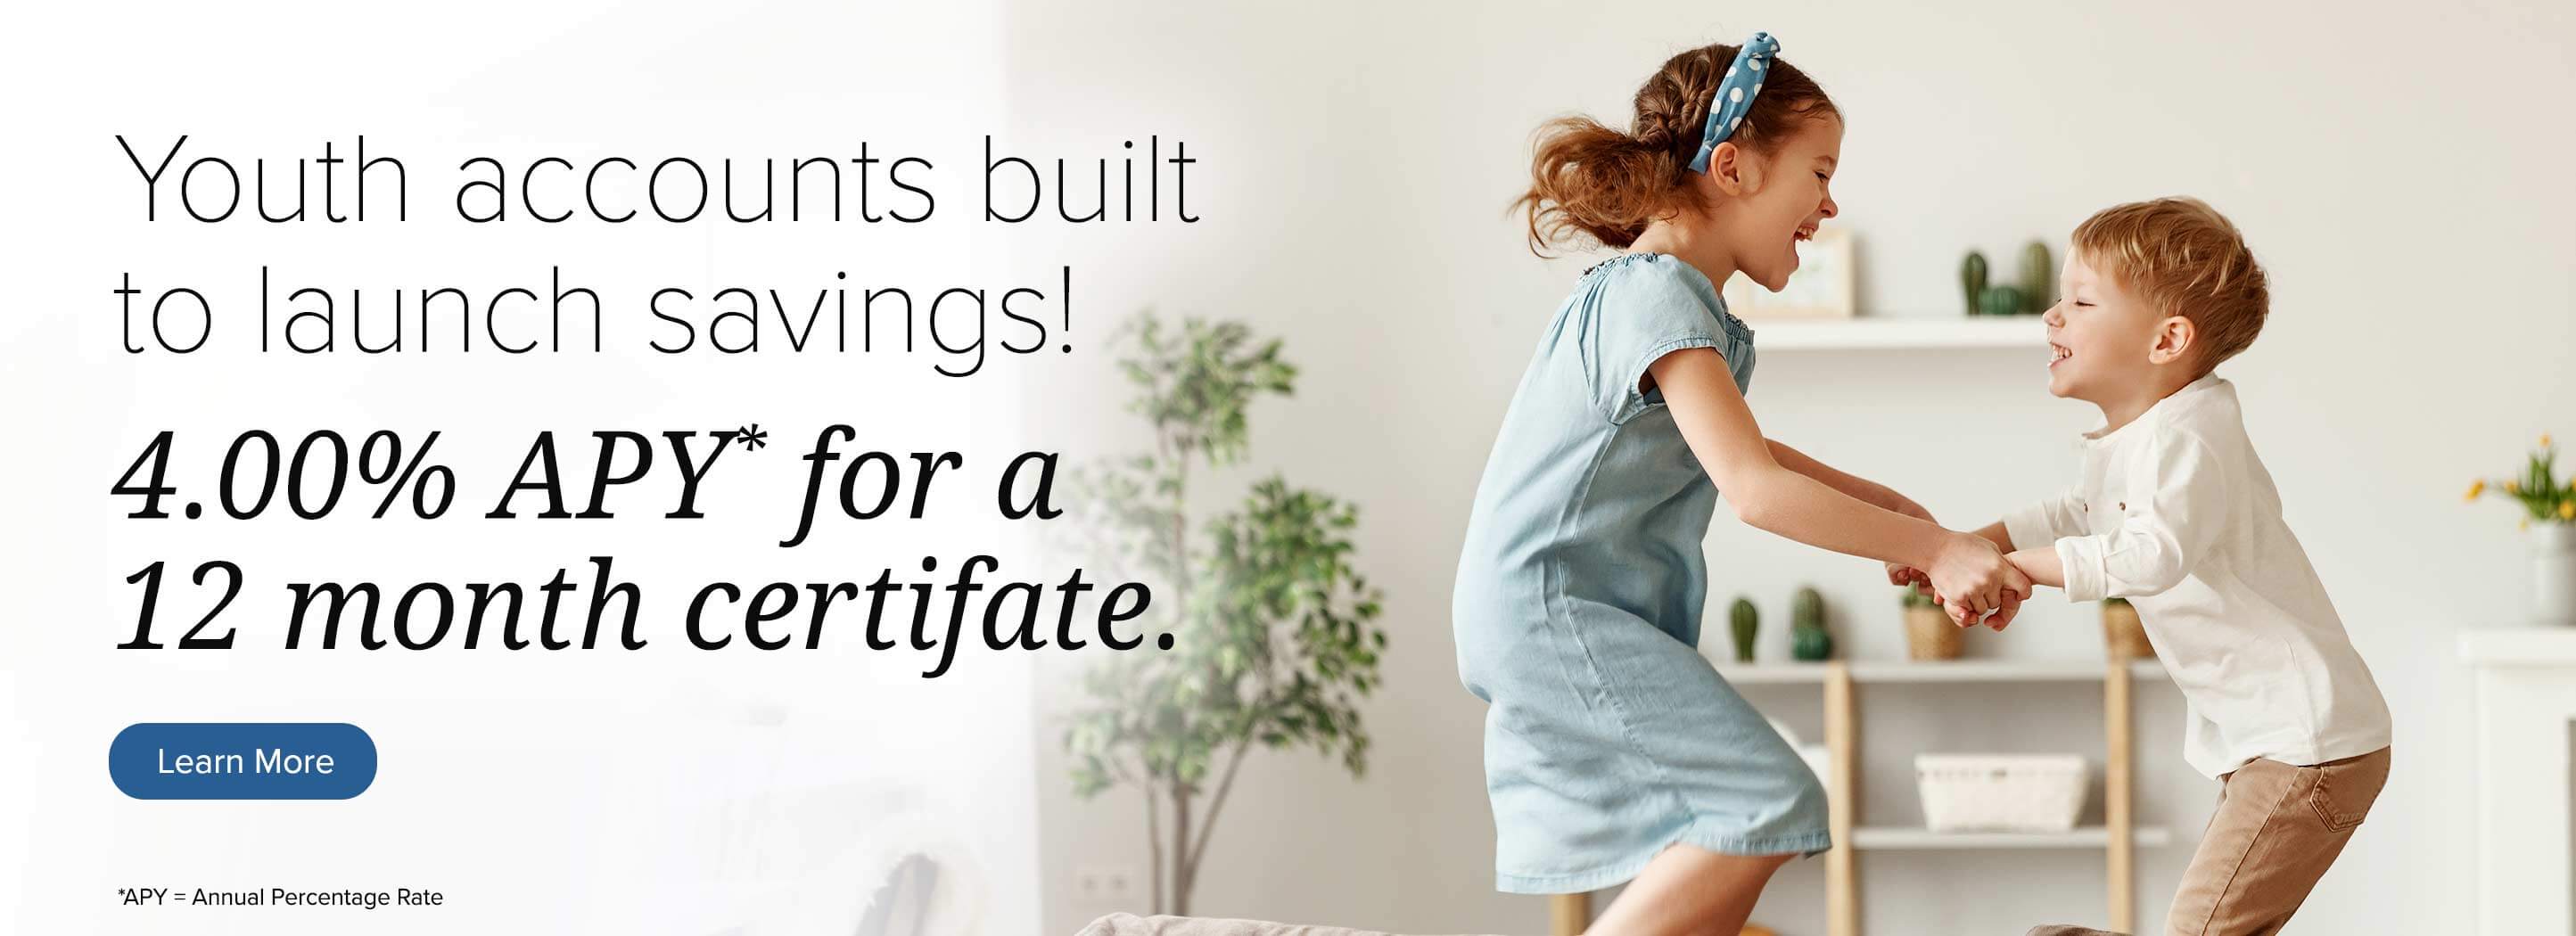 Youth accounts built to launch savings! 4.00% apy* for a 12 month certificate. Learn more *apy = annual percentage rate